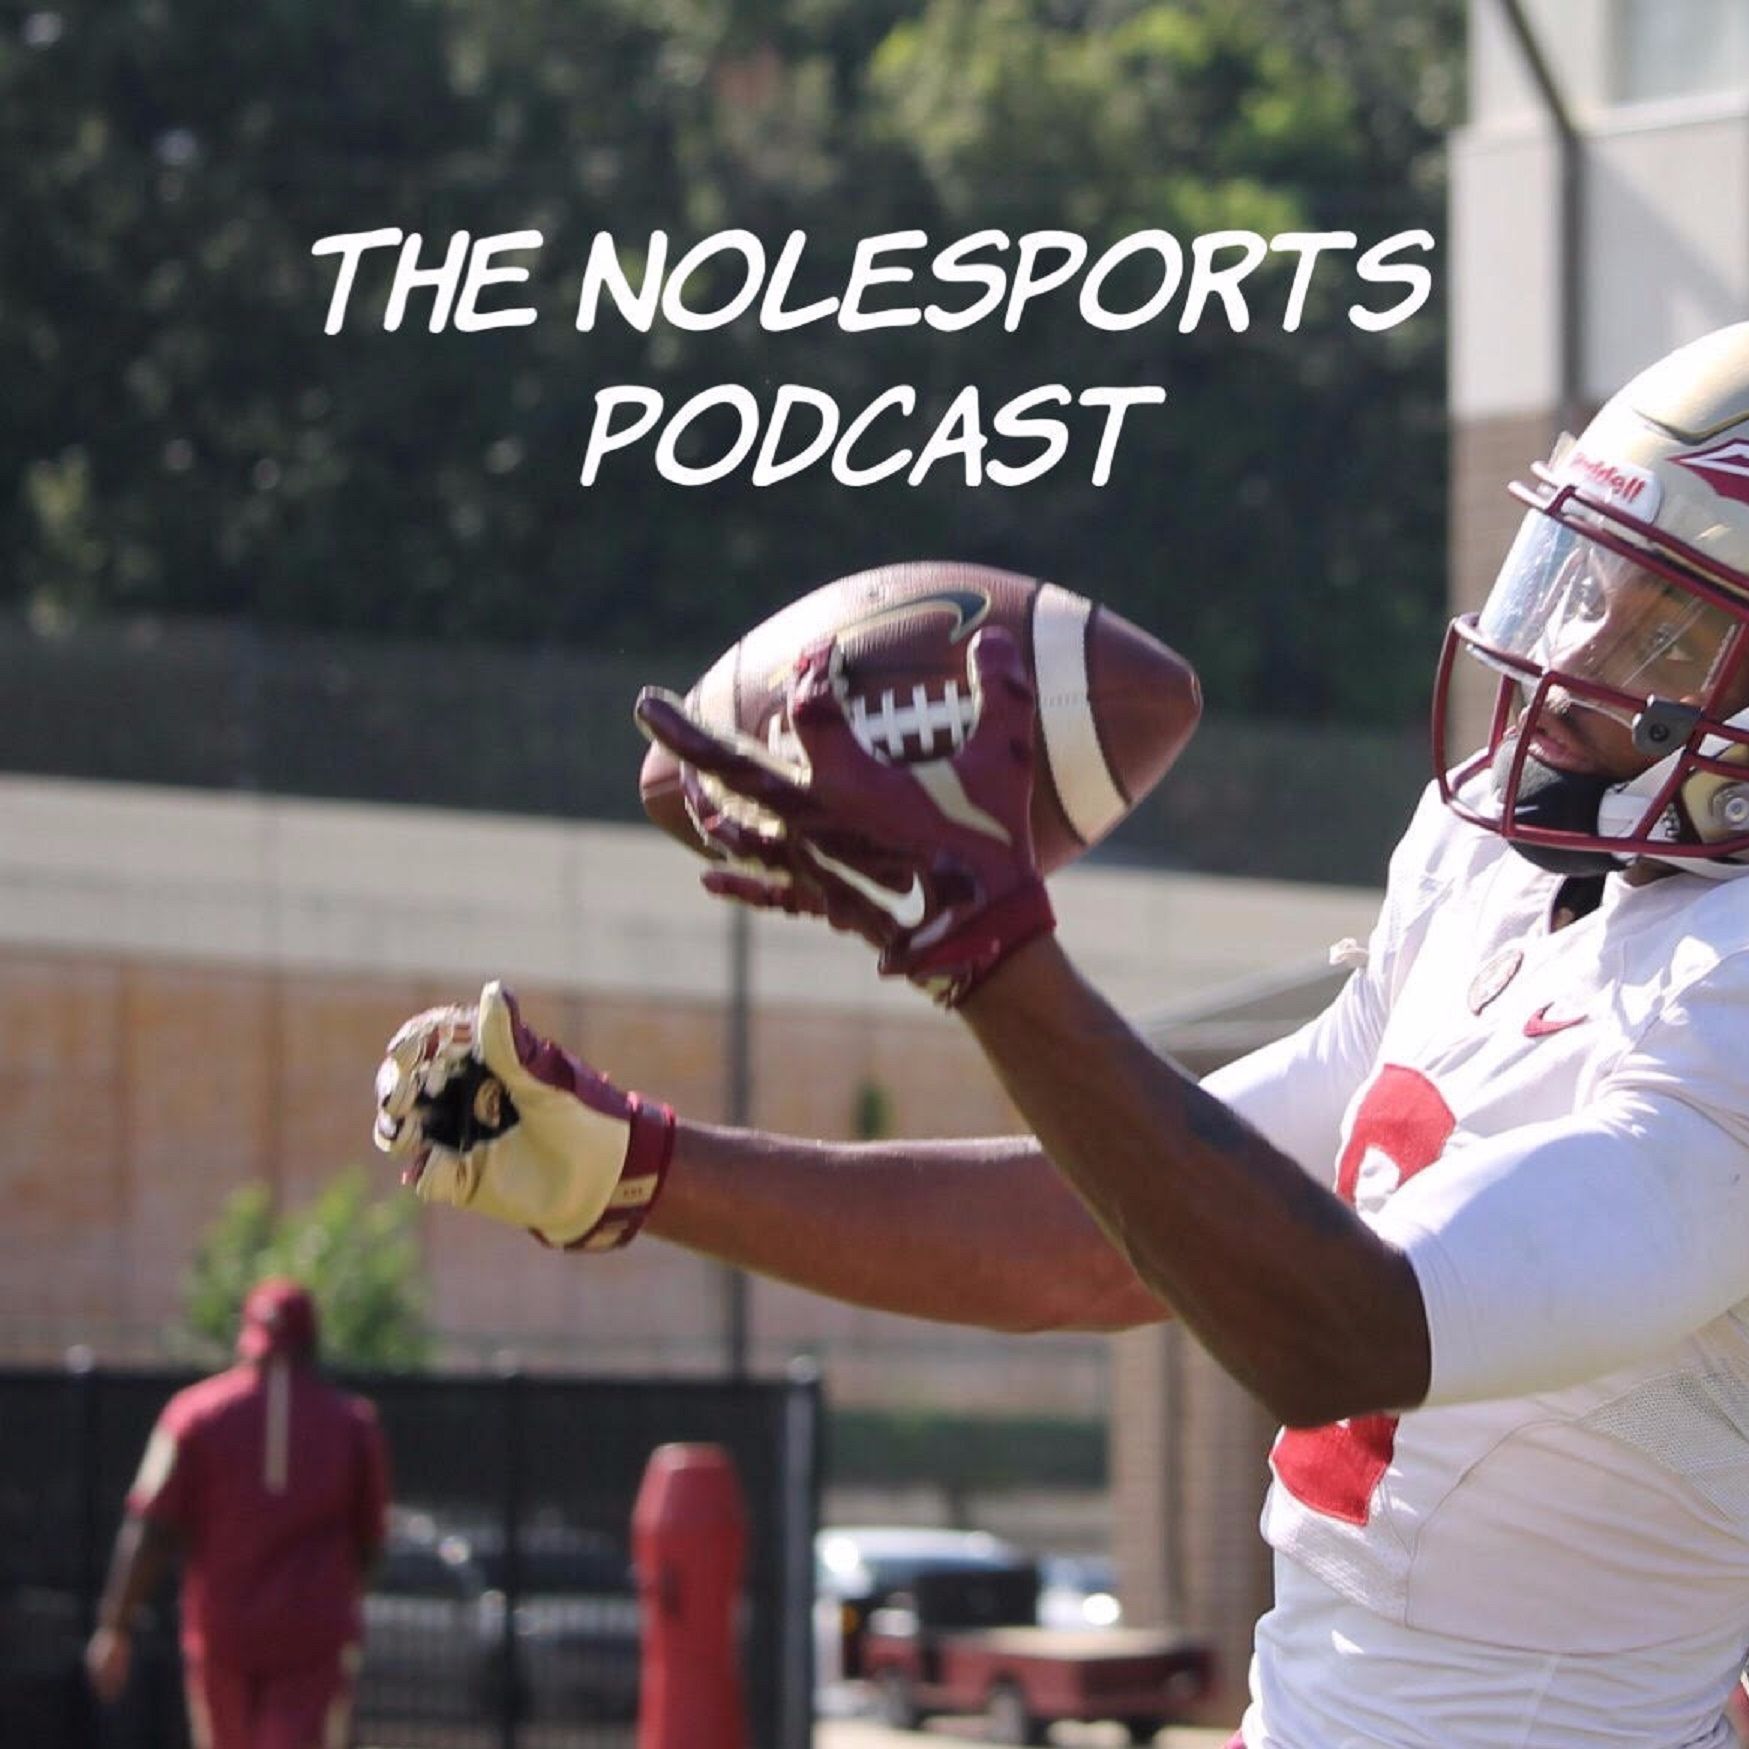 NoleSports Podcast - Mike Norvell is staying, portal/recruiting updates, FSU MBB & WBB